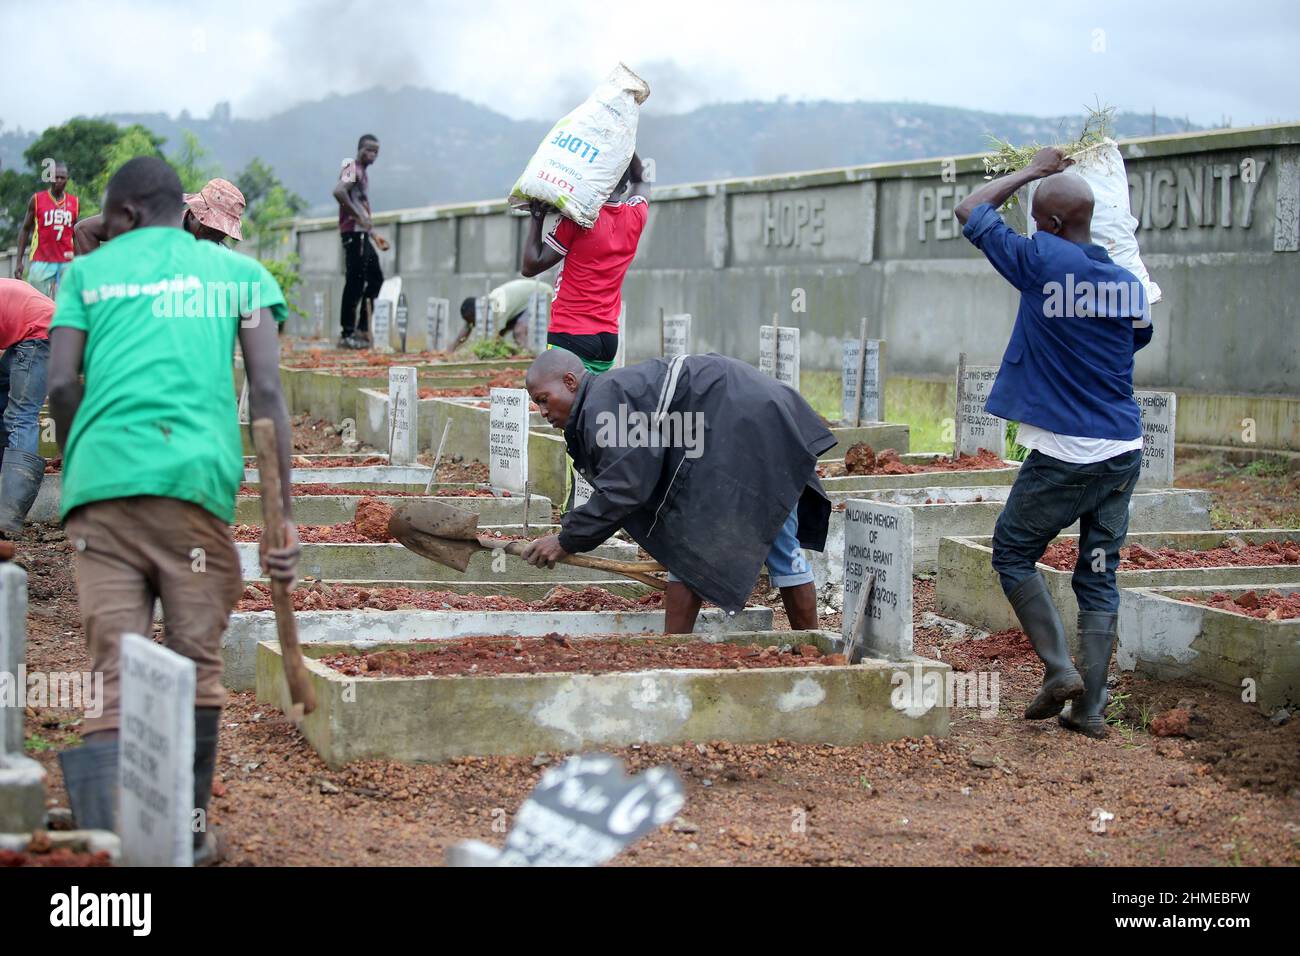 A cemetery is tended to in Sierra Leone's capital Freetown, where victims of the 2015 Ebola crisis were buried. Stock Photo